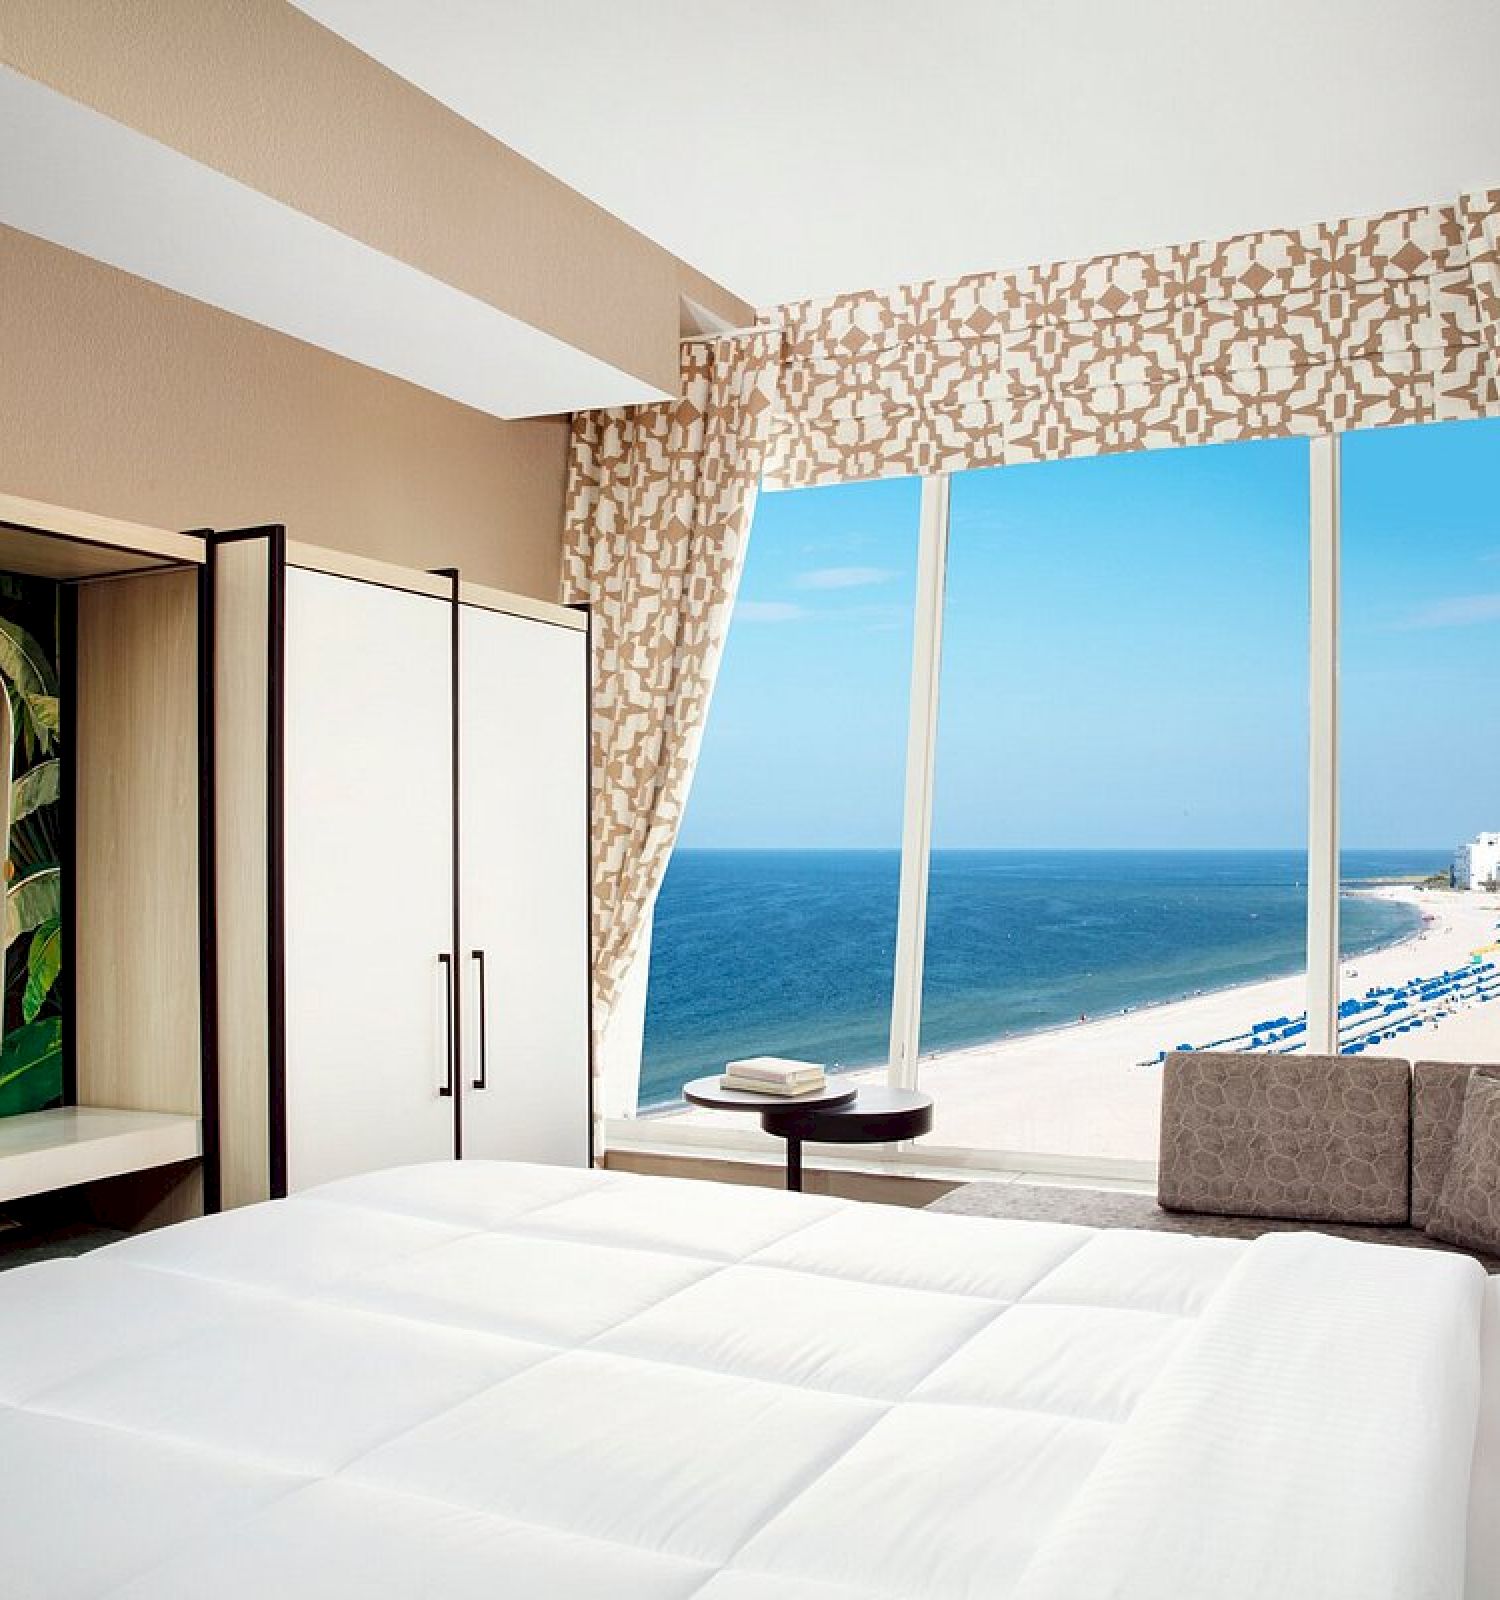 A modern bedroom with a large bed, ocean view, and elegant decor.